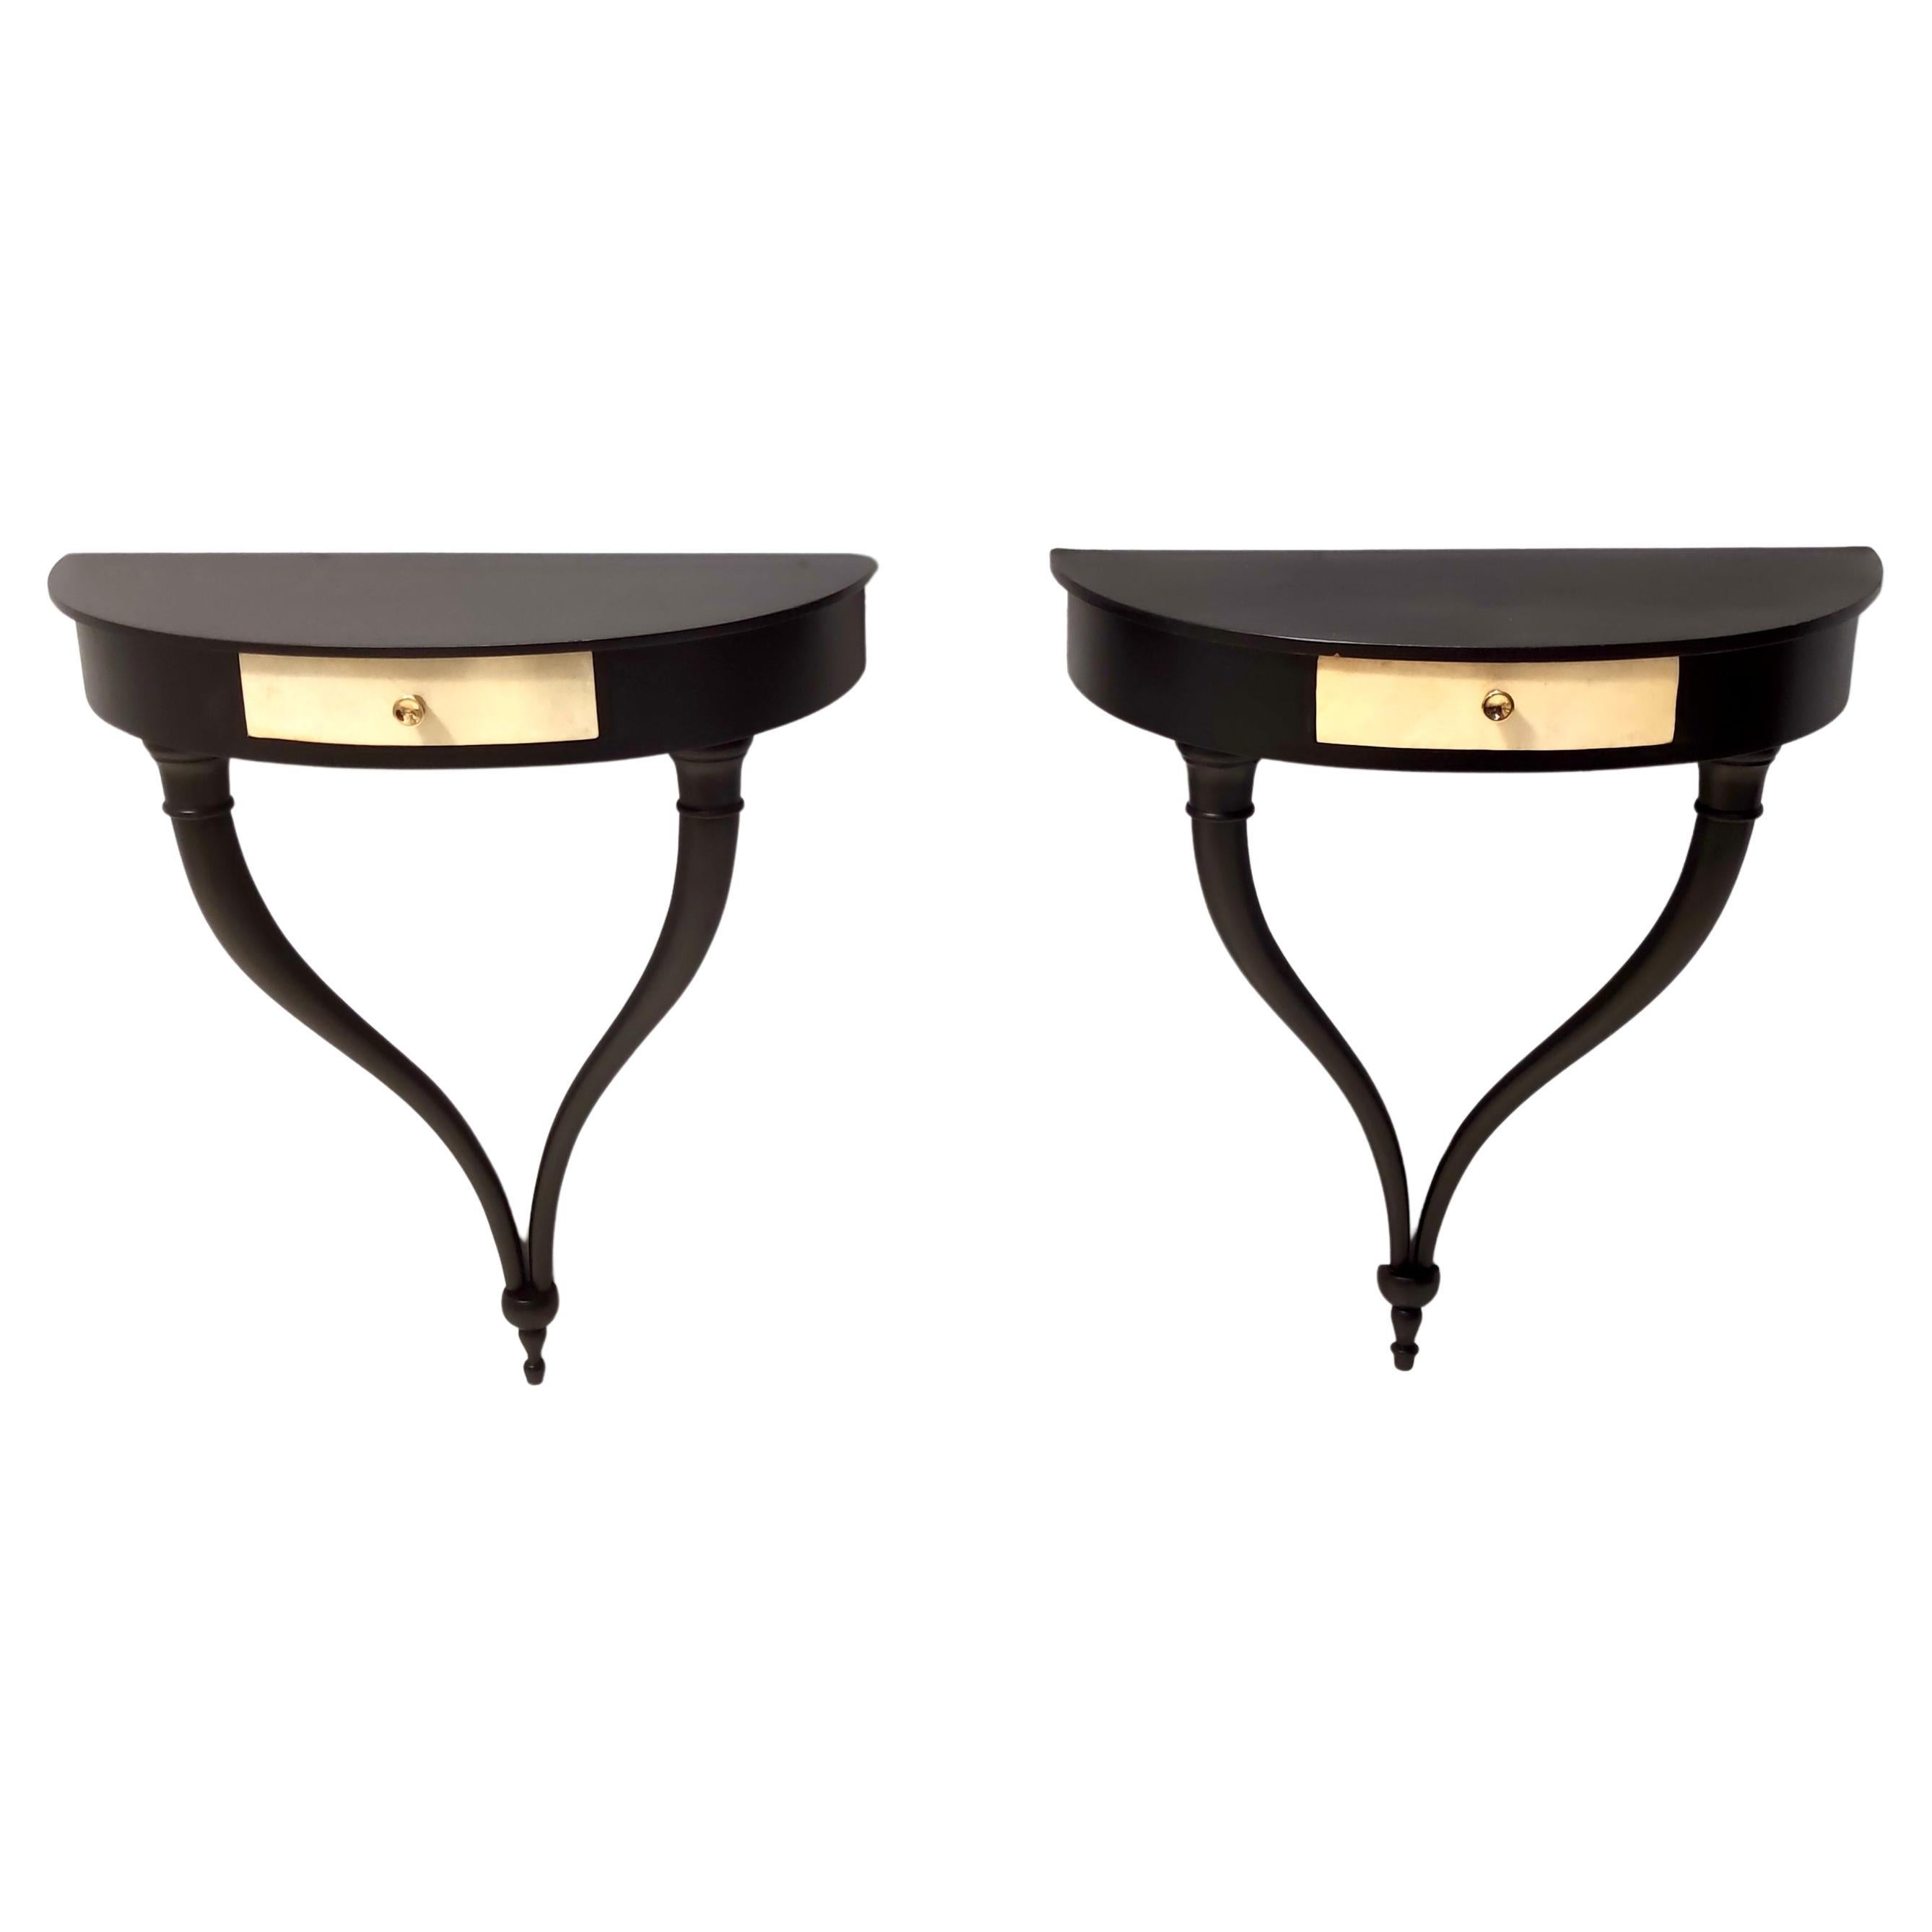 Pair of Wall-Mounted Console Tables / Nightstands by Guglielmo Ulrich, Italy